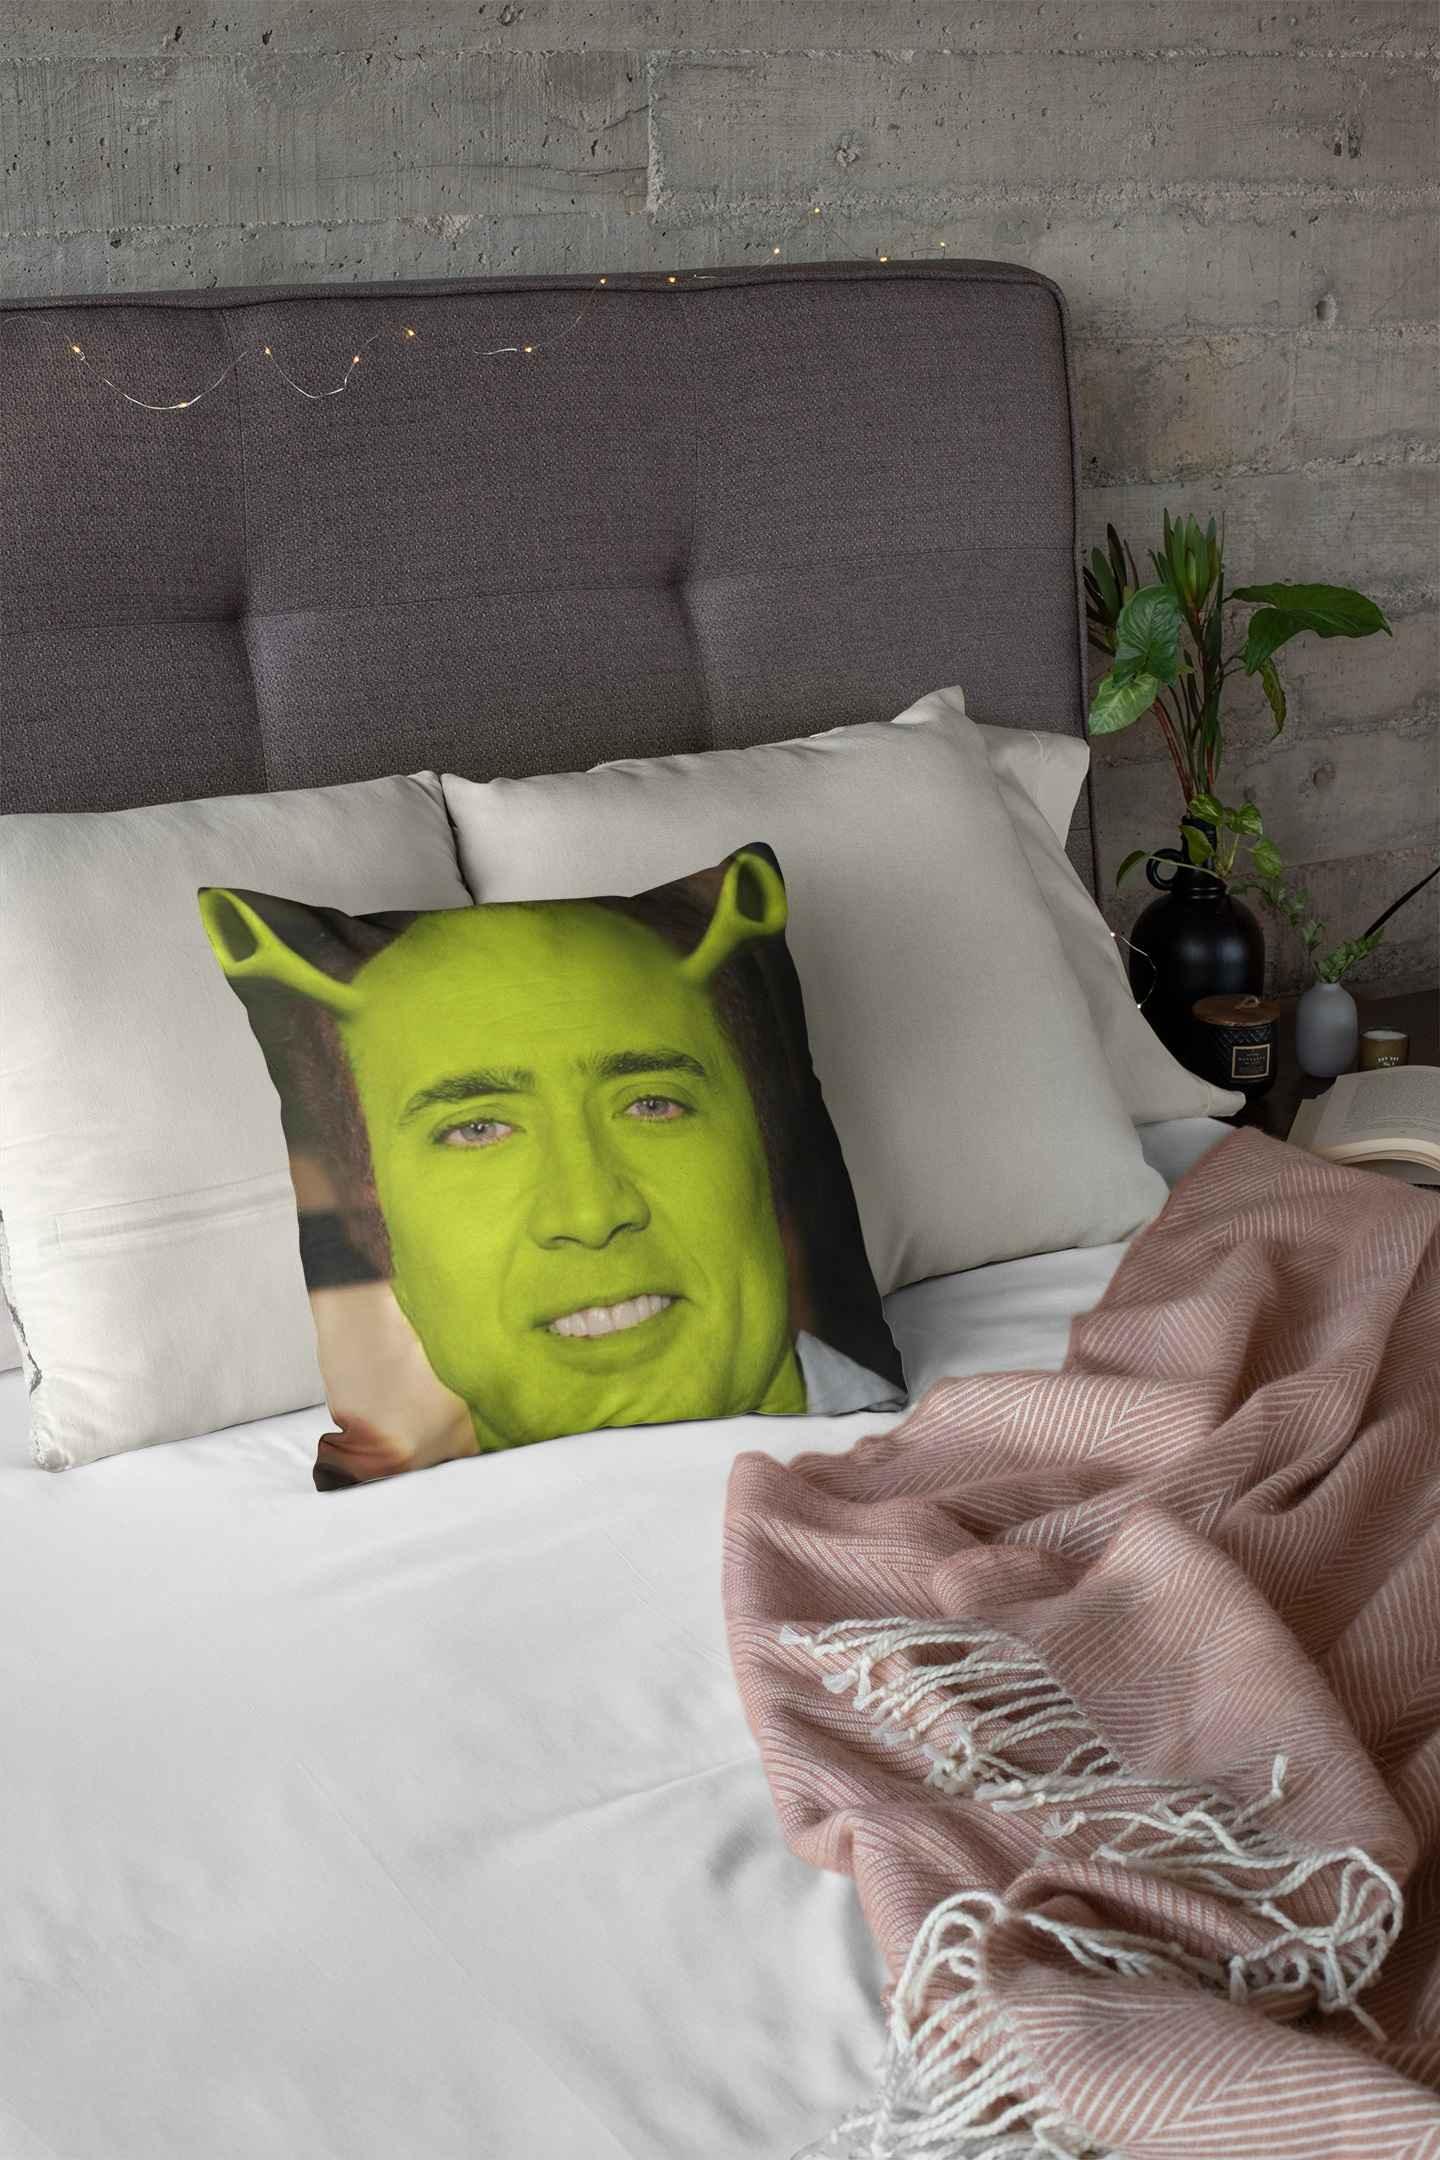 A Nicolas Cage Shrek pillow on a bed with a white duvet.